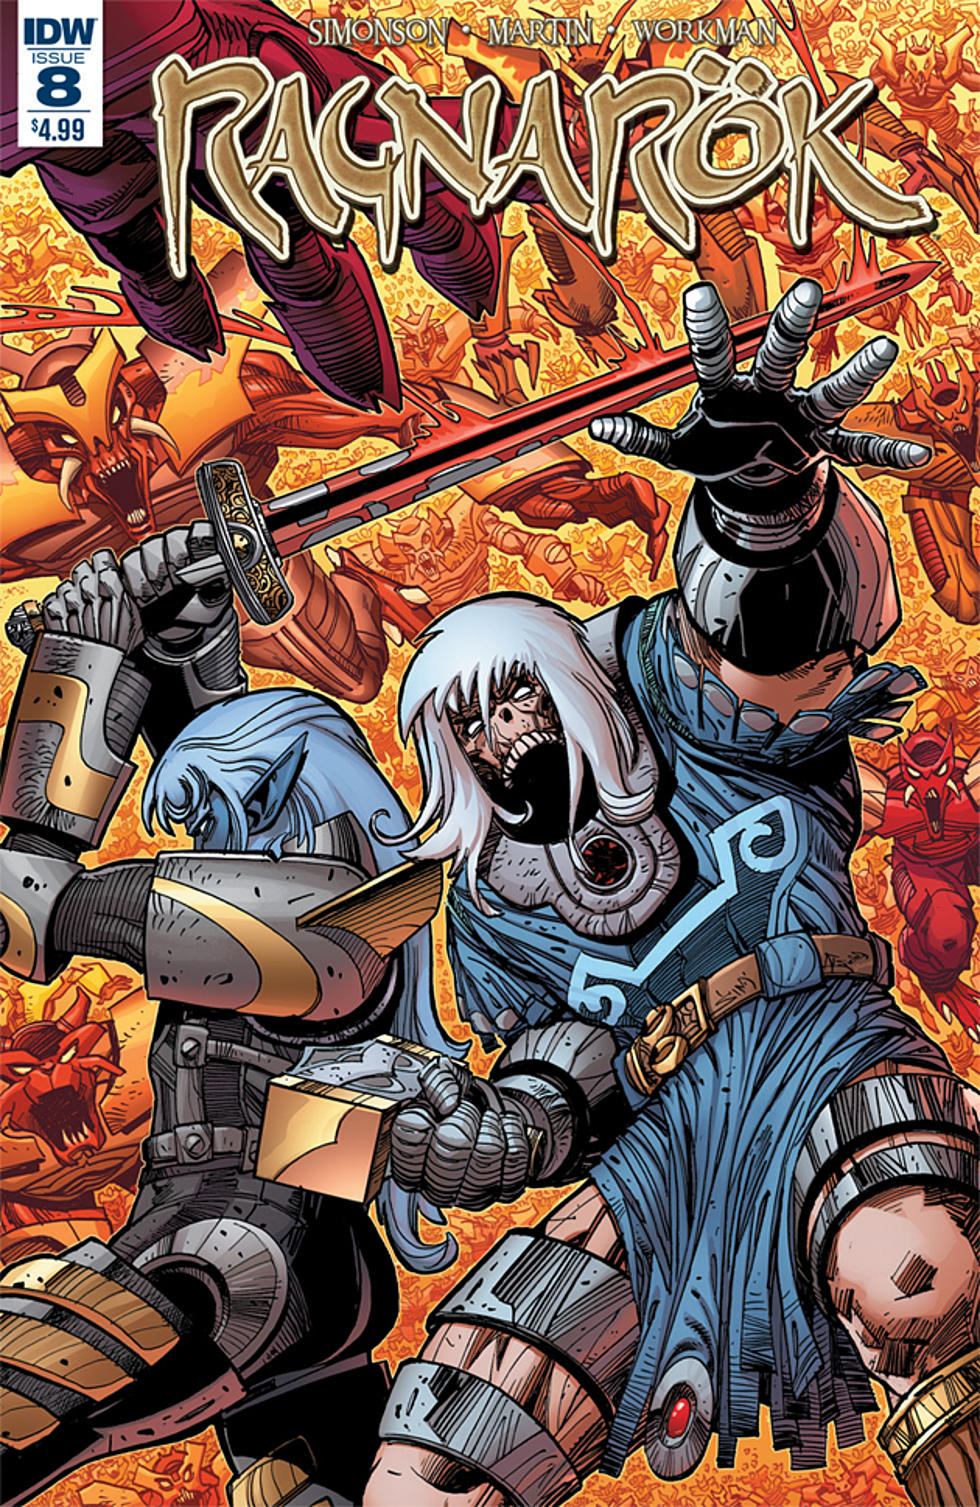 Mike Mignola Provides A Variant Cover For Walt Simonson&#8217;s &#8216;Ragnarok&#8217; #8, And It&#8217;s Unsurprisingly Awesome